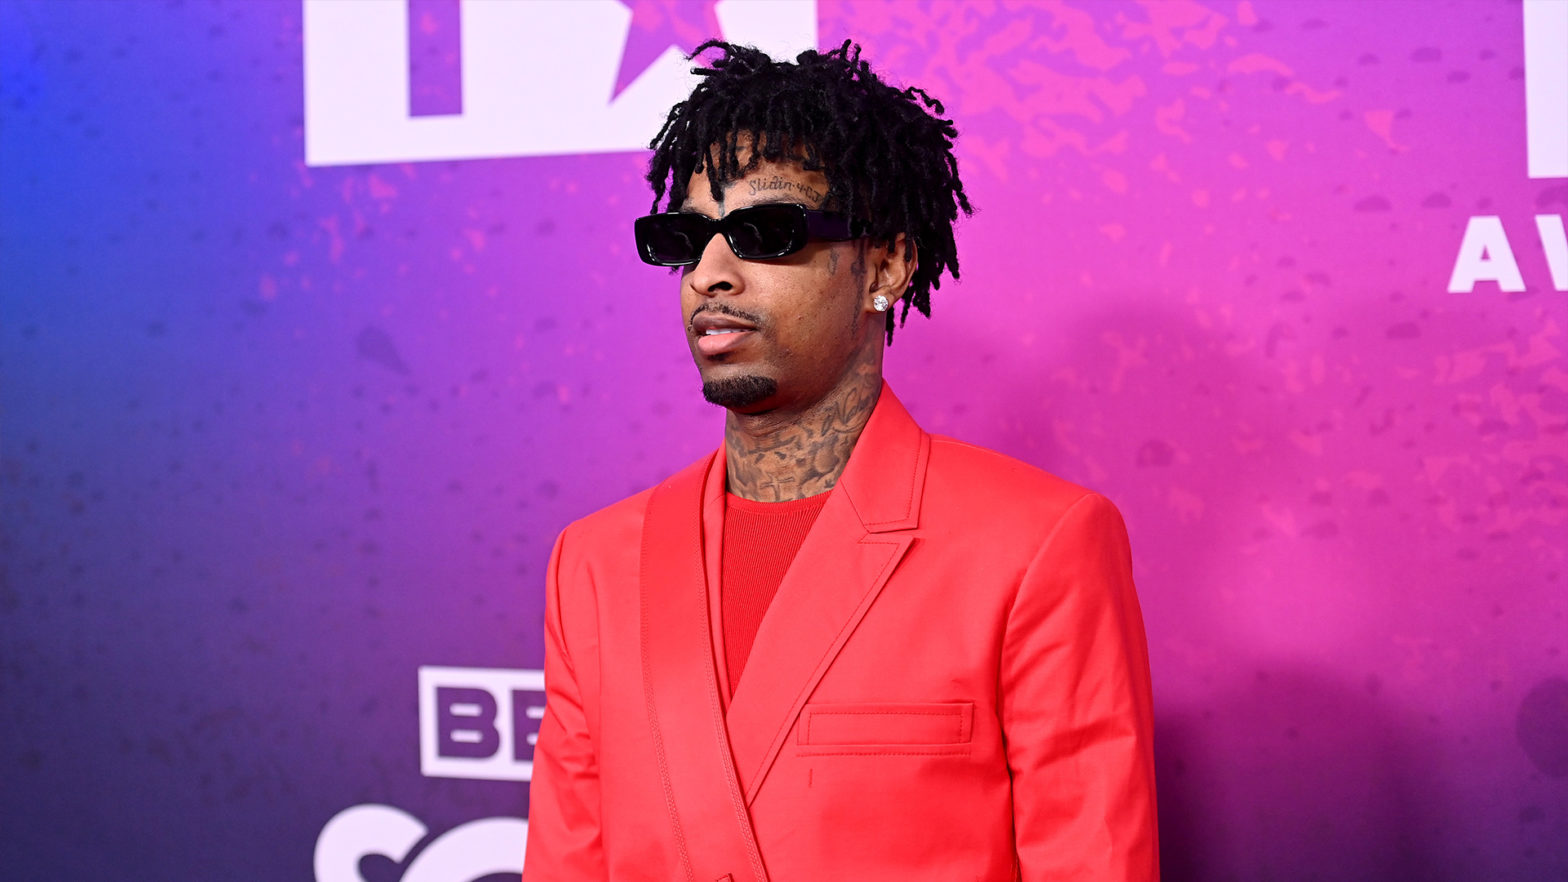 21 Savage Invests In Sound.xyz's $5M Seed Round To Help Artists Earn Money Through NFTs